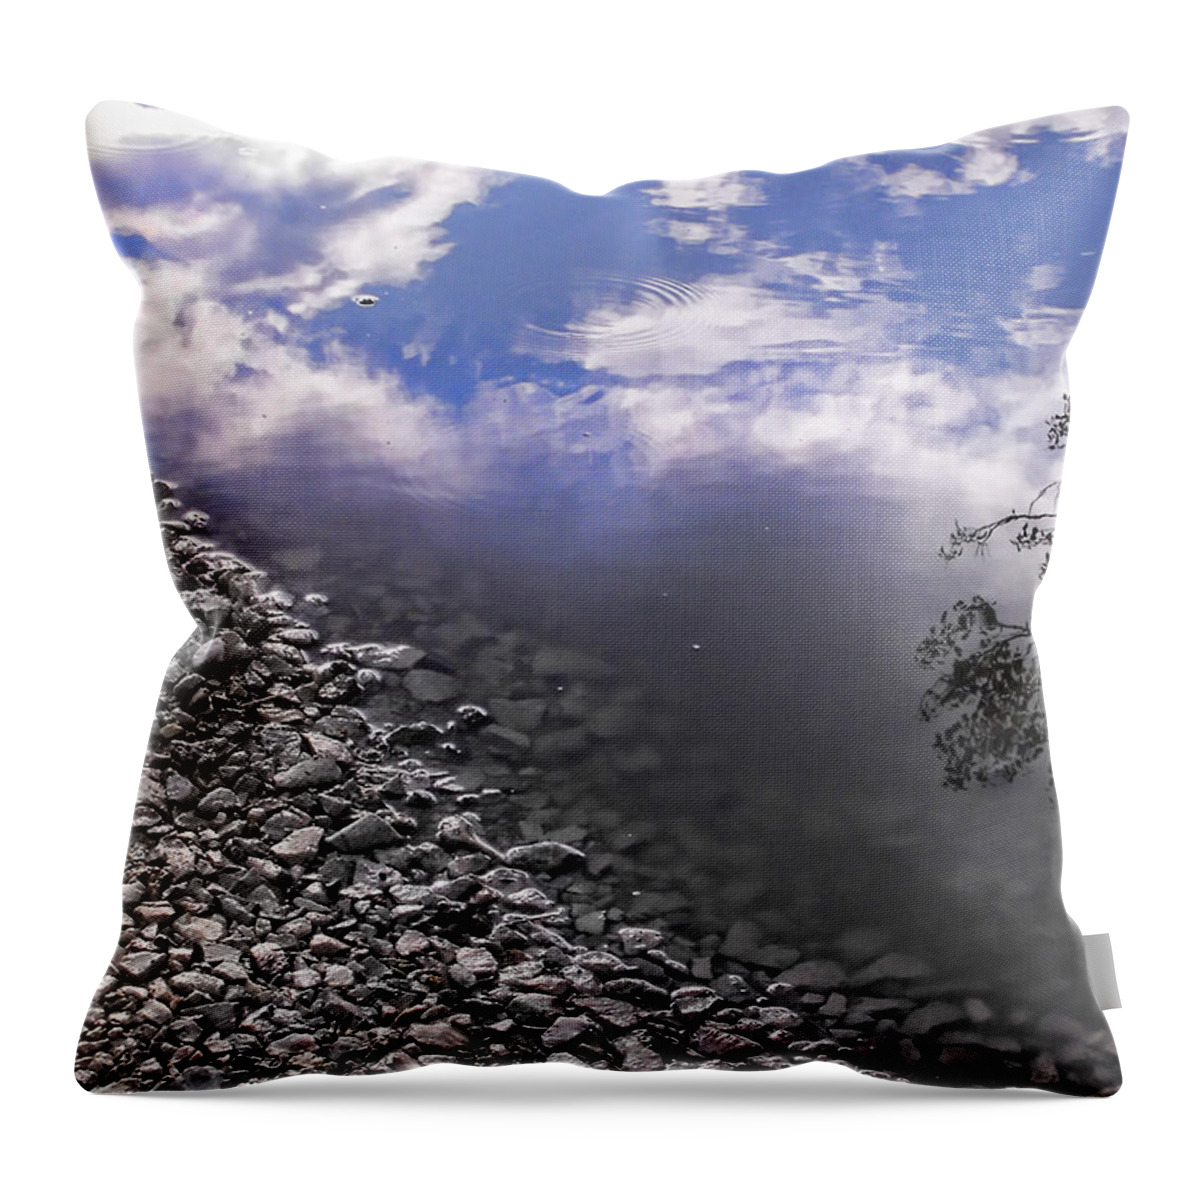 Puddle Throw Pillow featuring the photograph After The Rain by Kristie Bonnewell